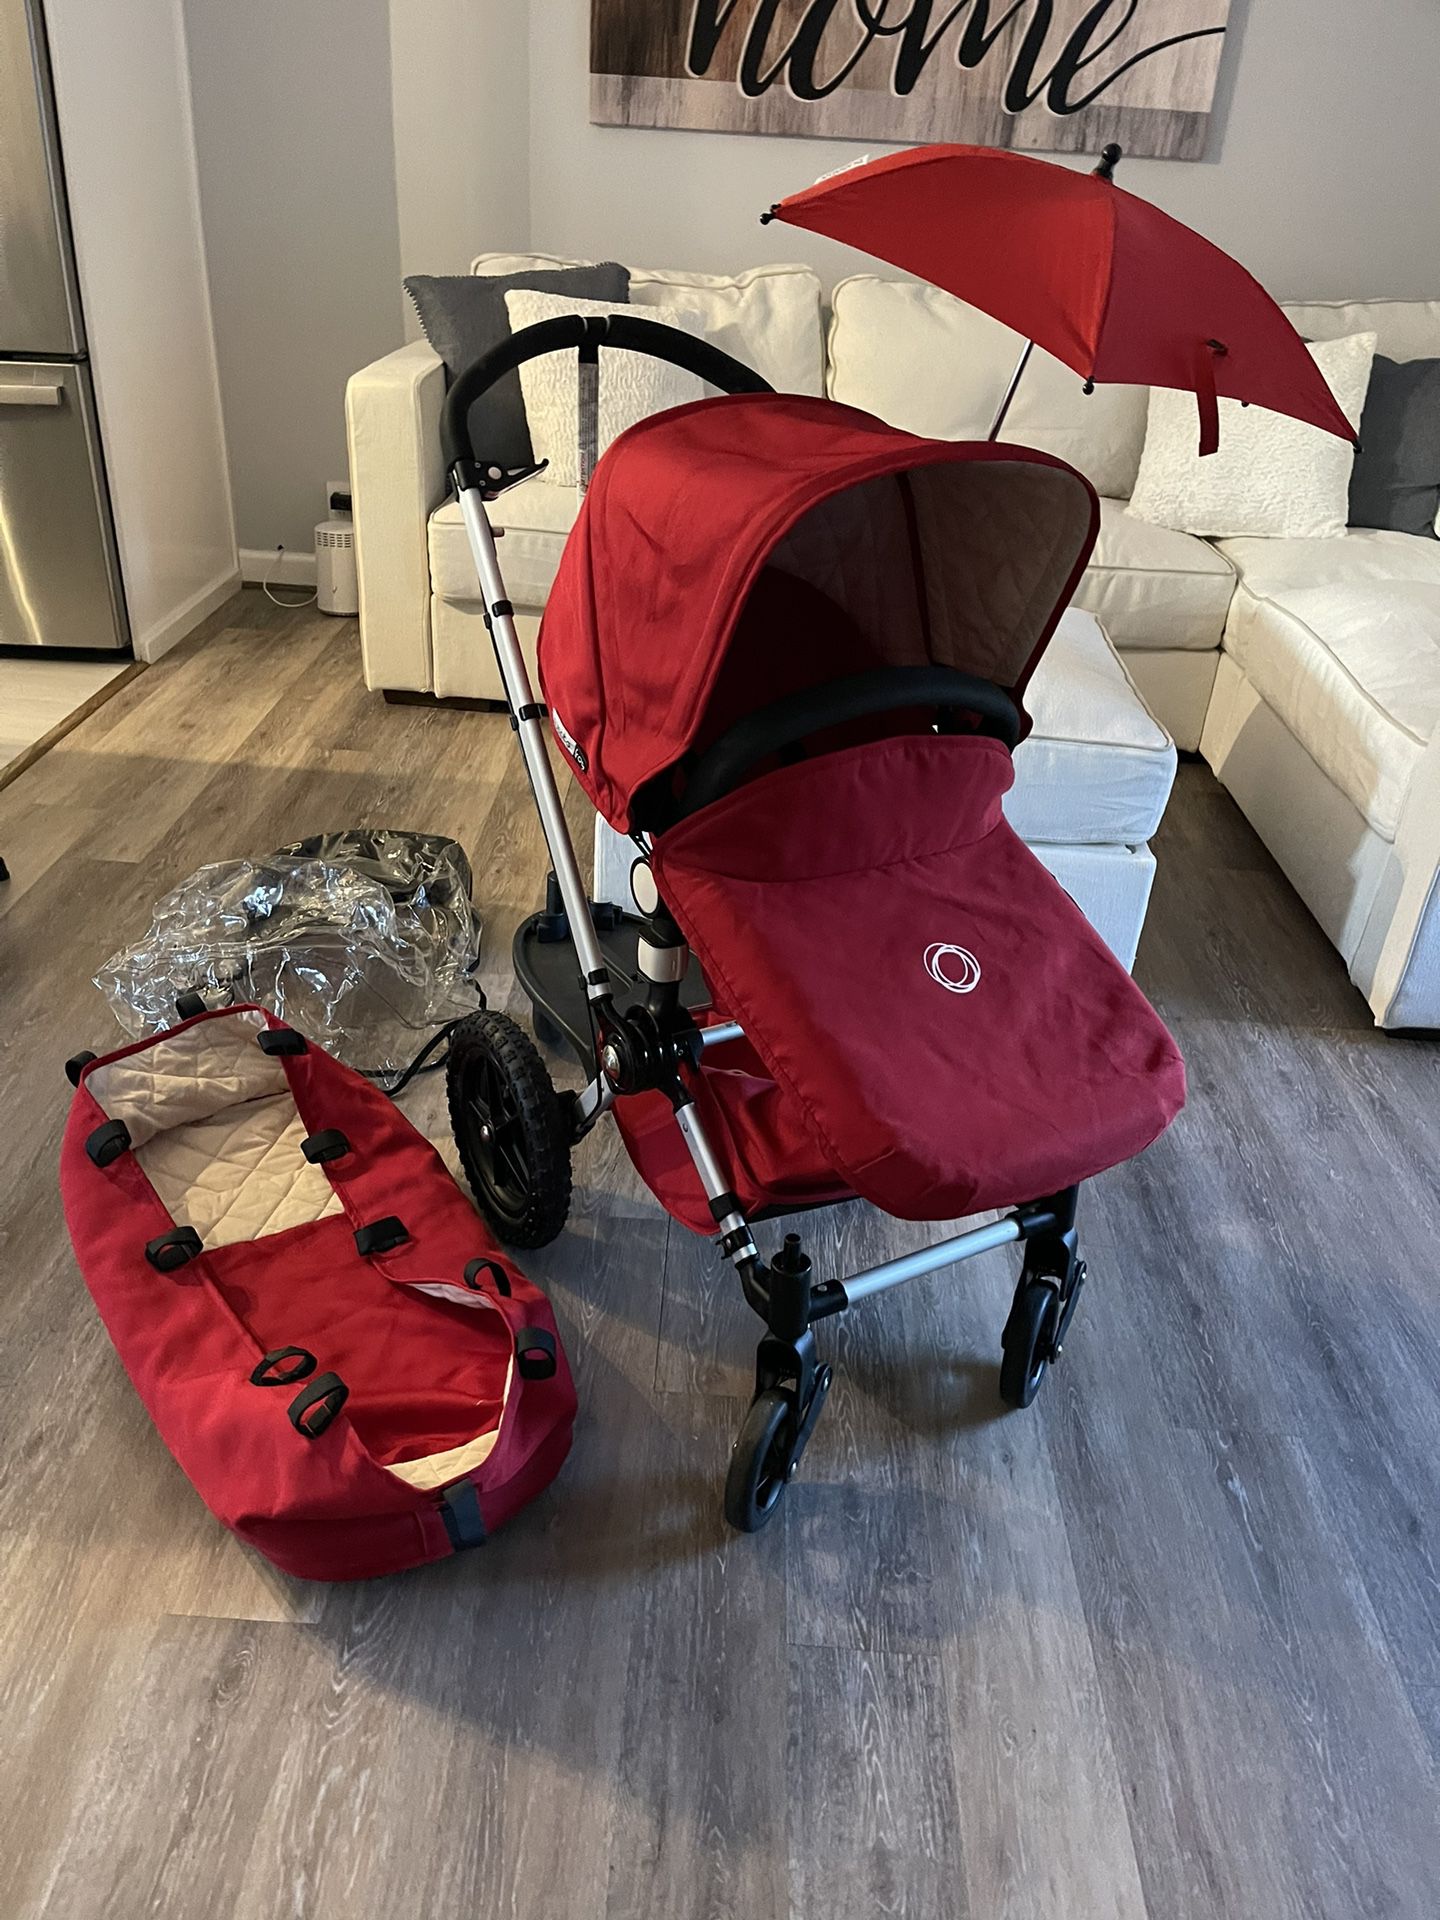 Stroller Sale Yonkers, NY - OfferUp